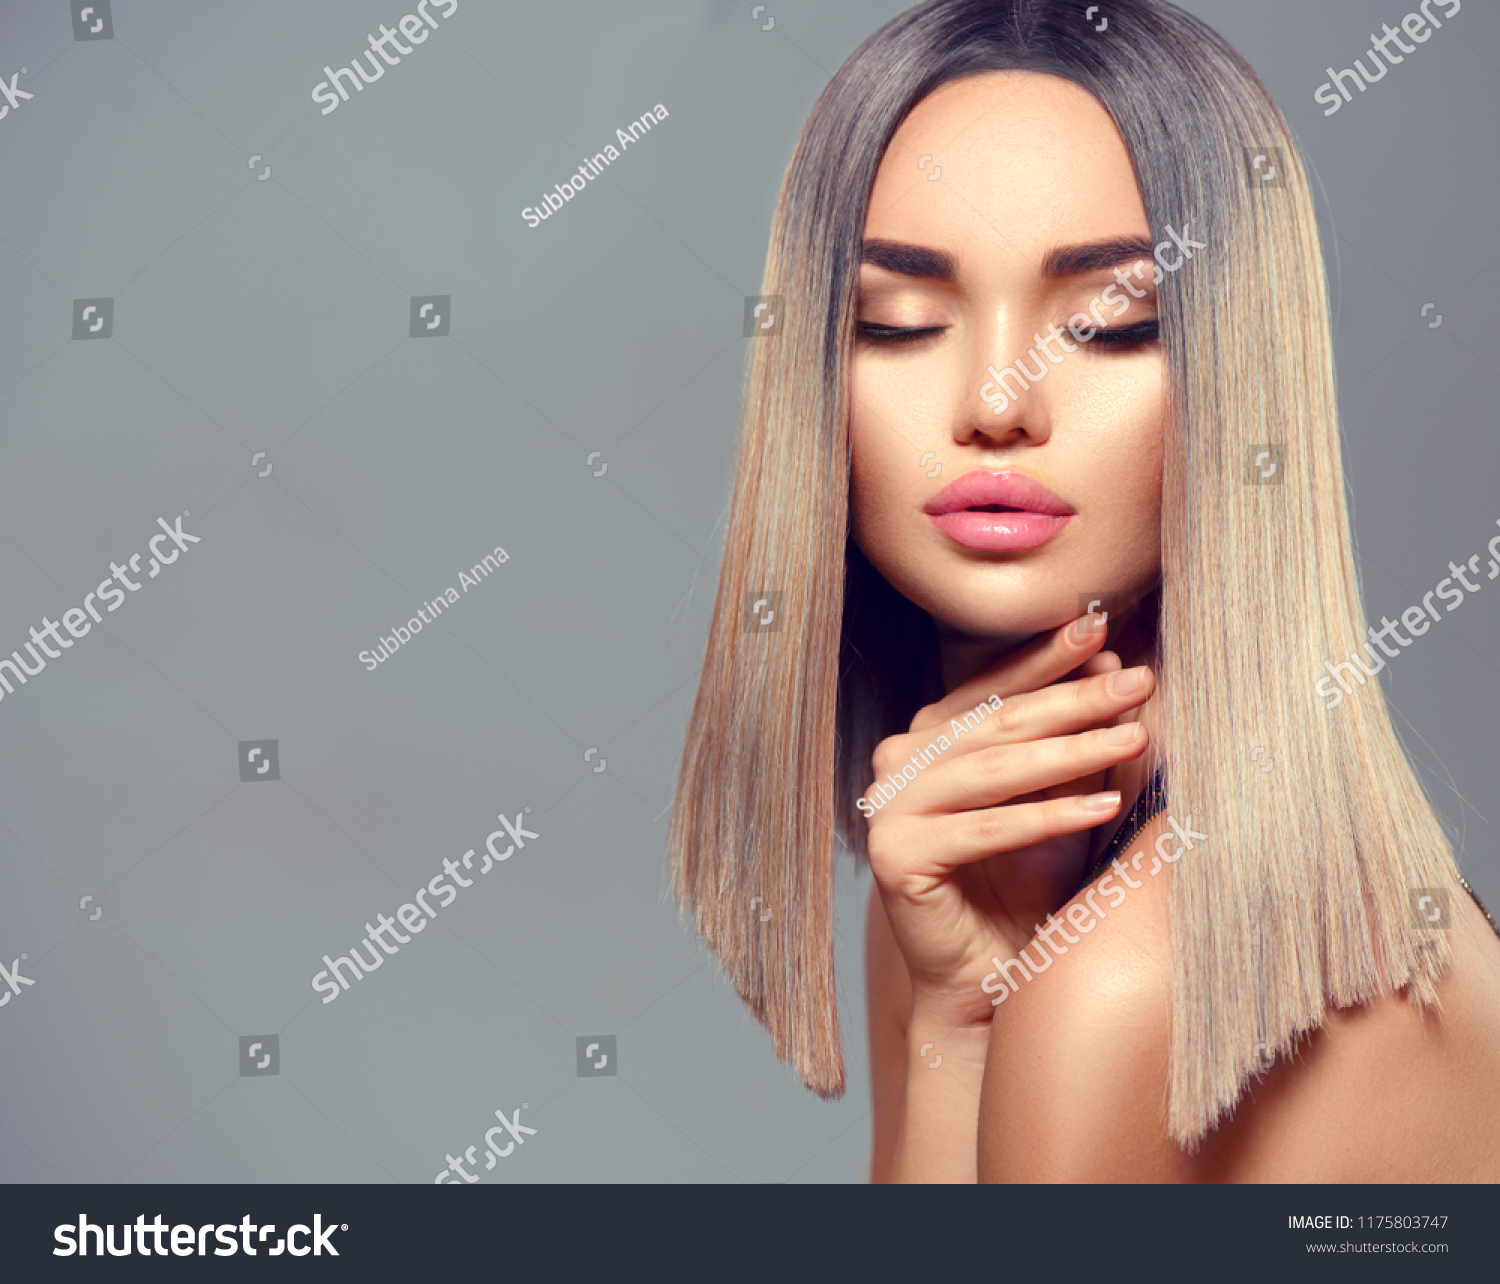 Trendy Fashion Hairstyle Haircut Ombre Dyed Stock Photo